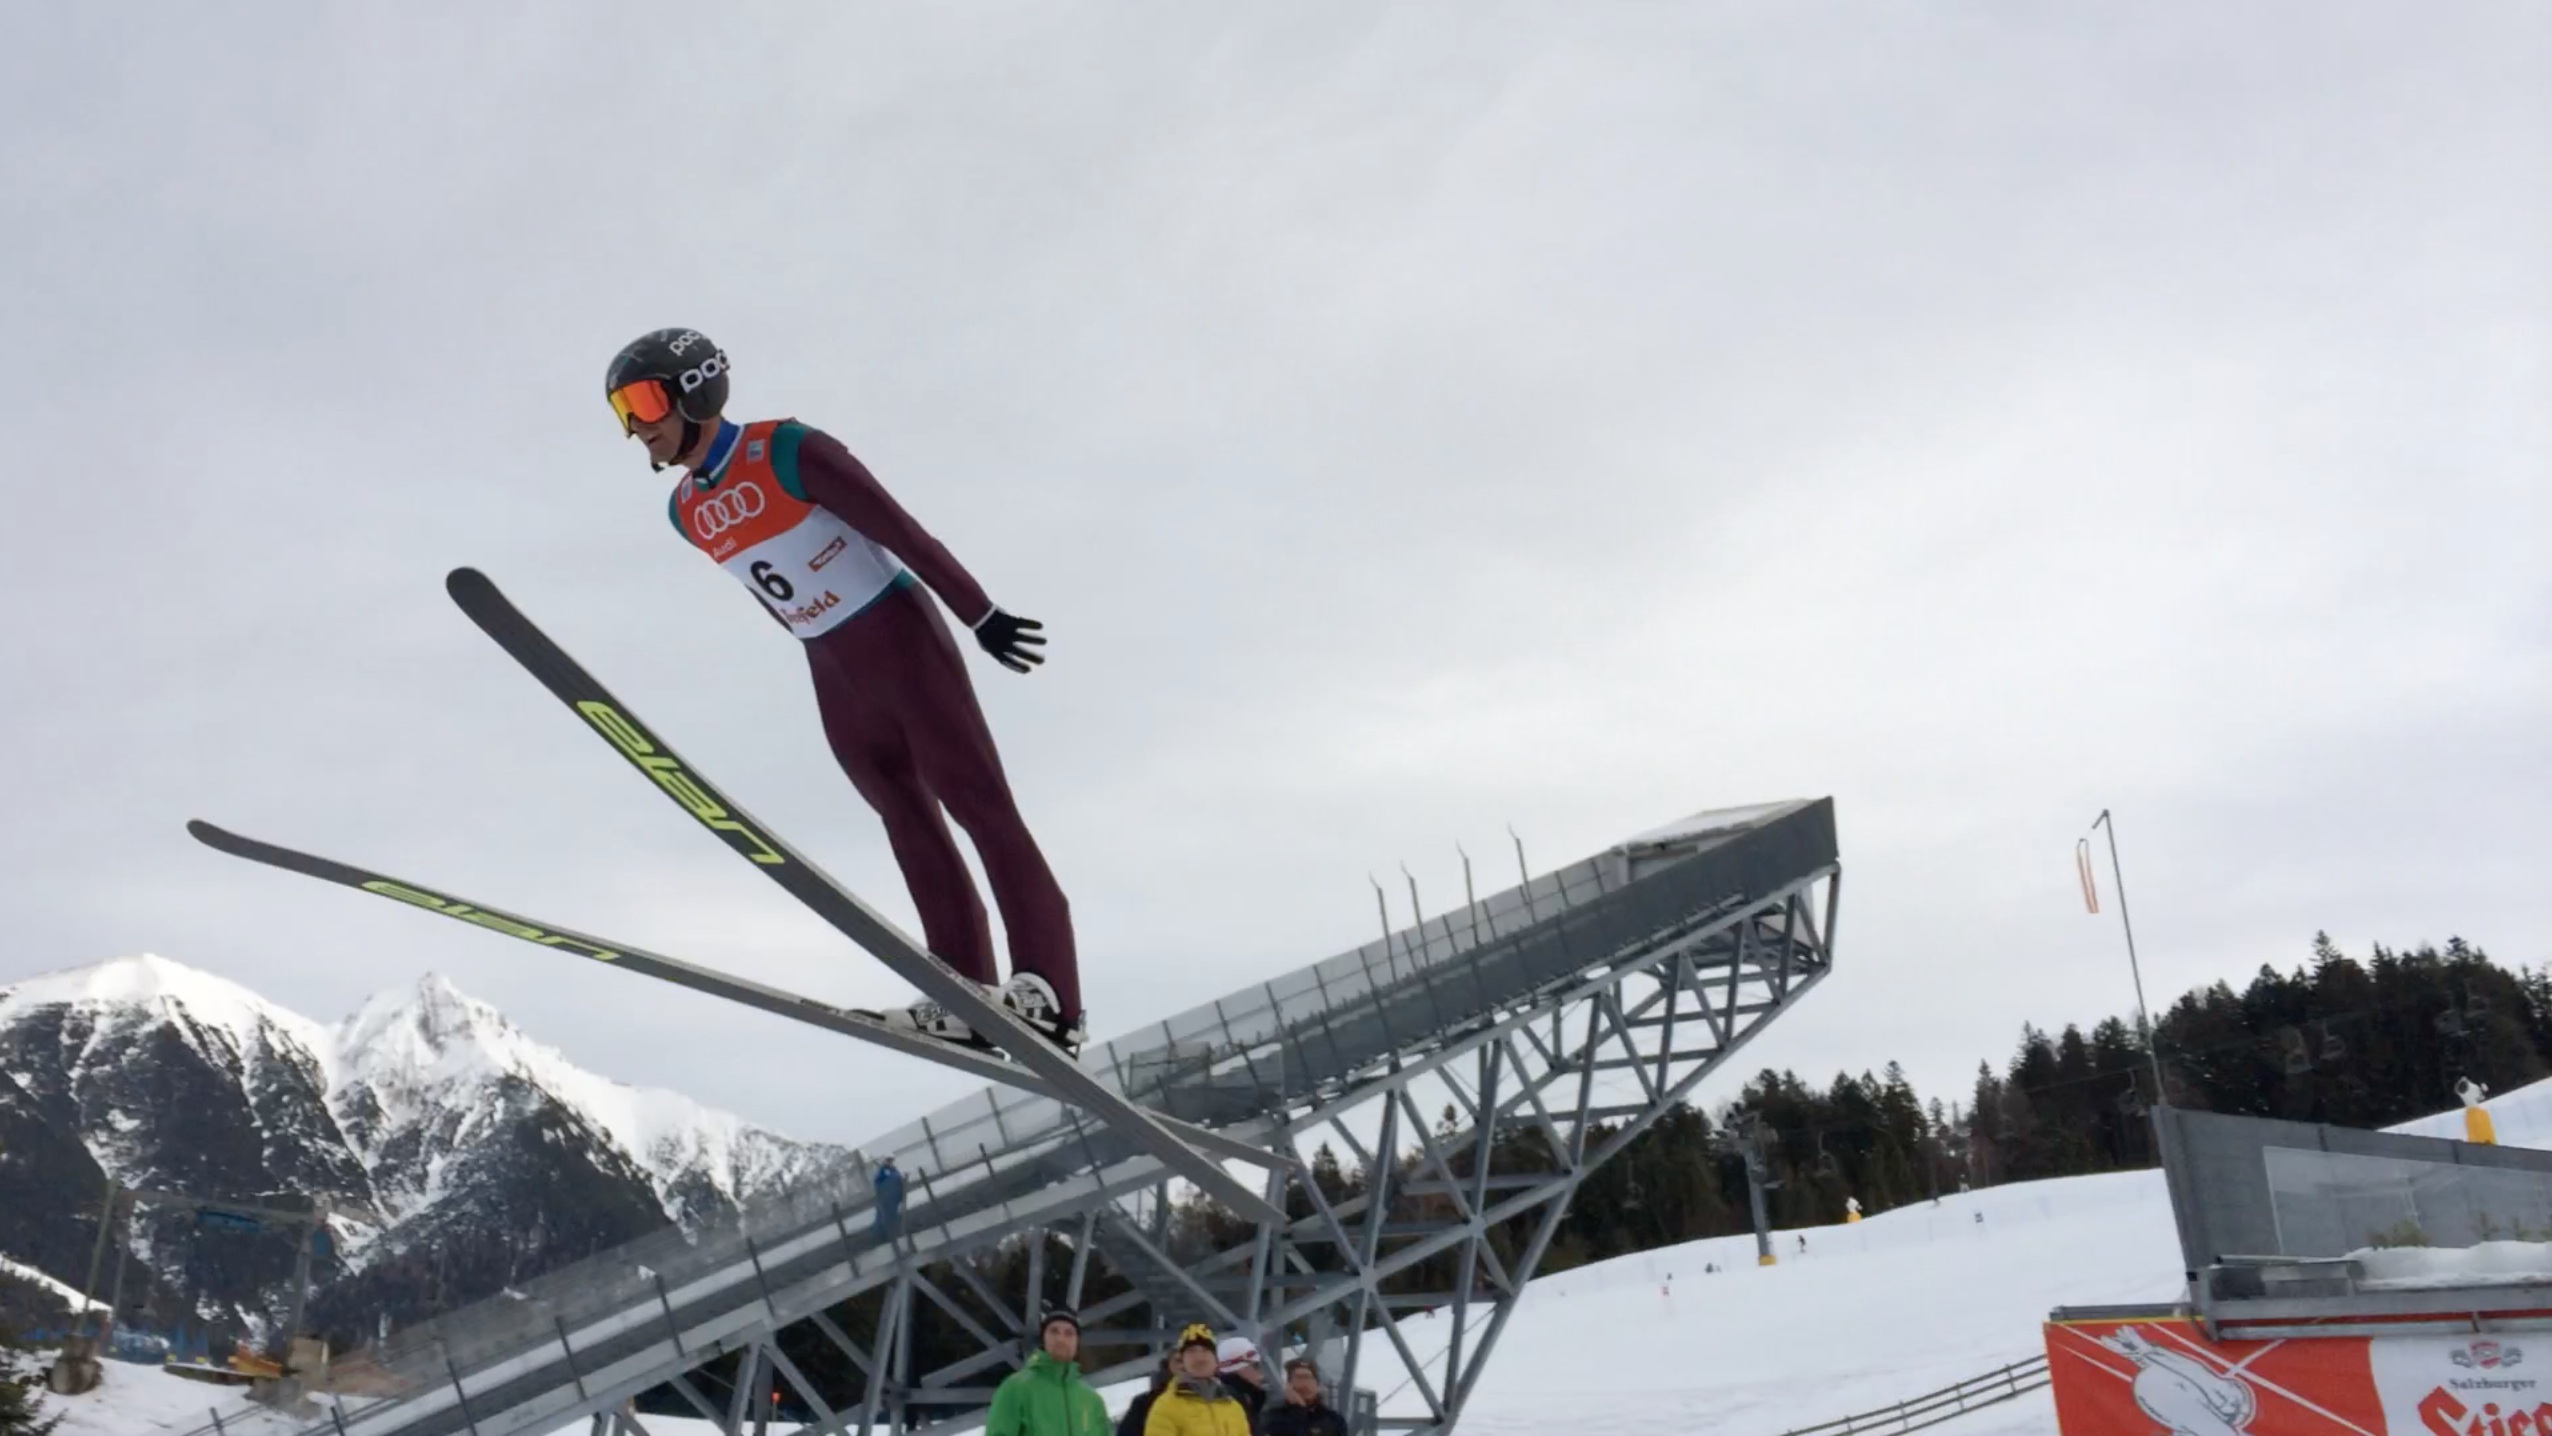 Bryan Fletcher (U.S. Nordic Combined) jumping to ninth on Day 2 of the Nordic Combined World Cup Triple in Seefeld, Austria. Fletcher improved to sixth in the 10 k. (Photo: Fast Big Dog)